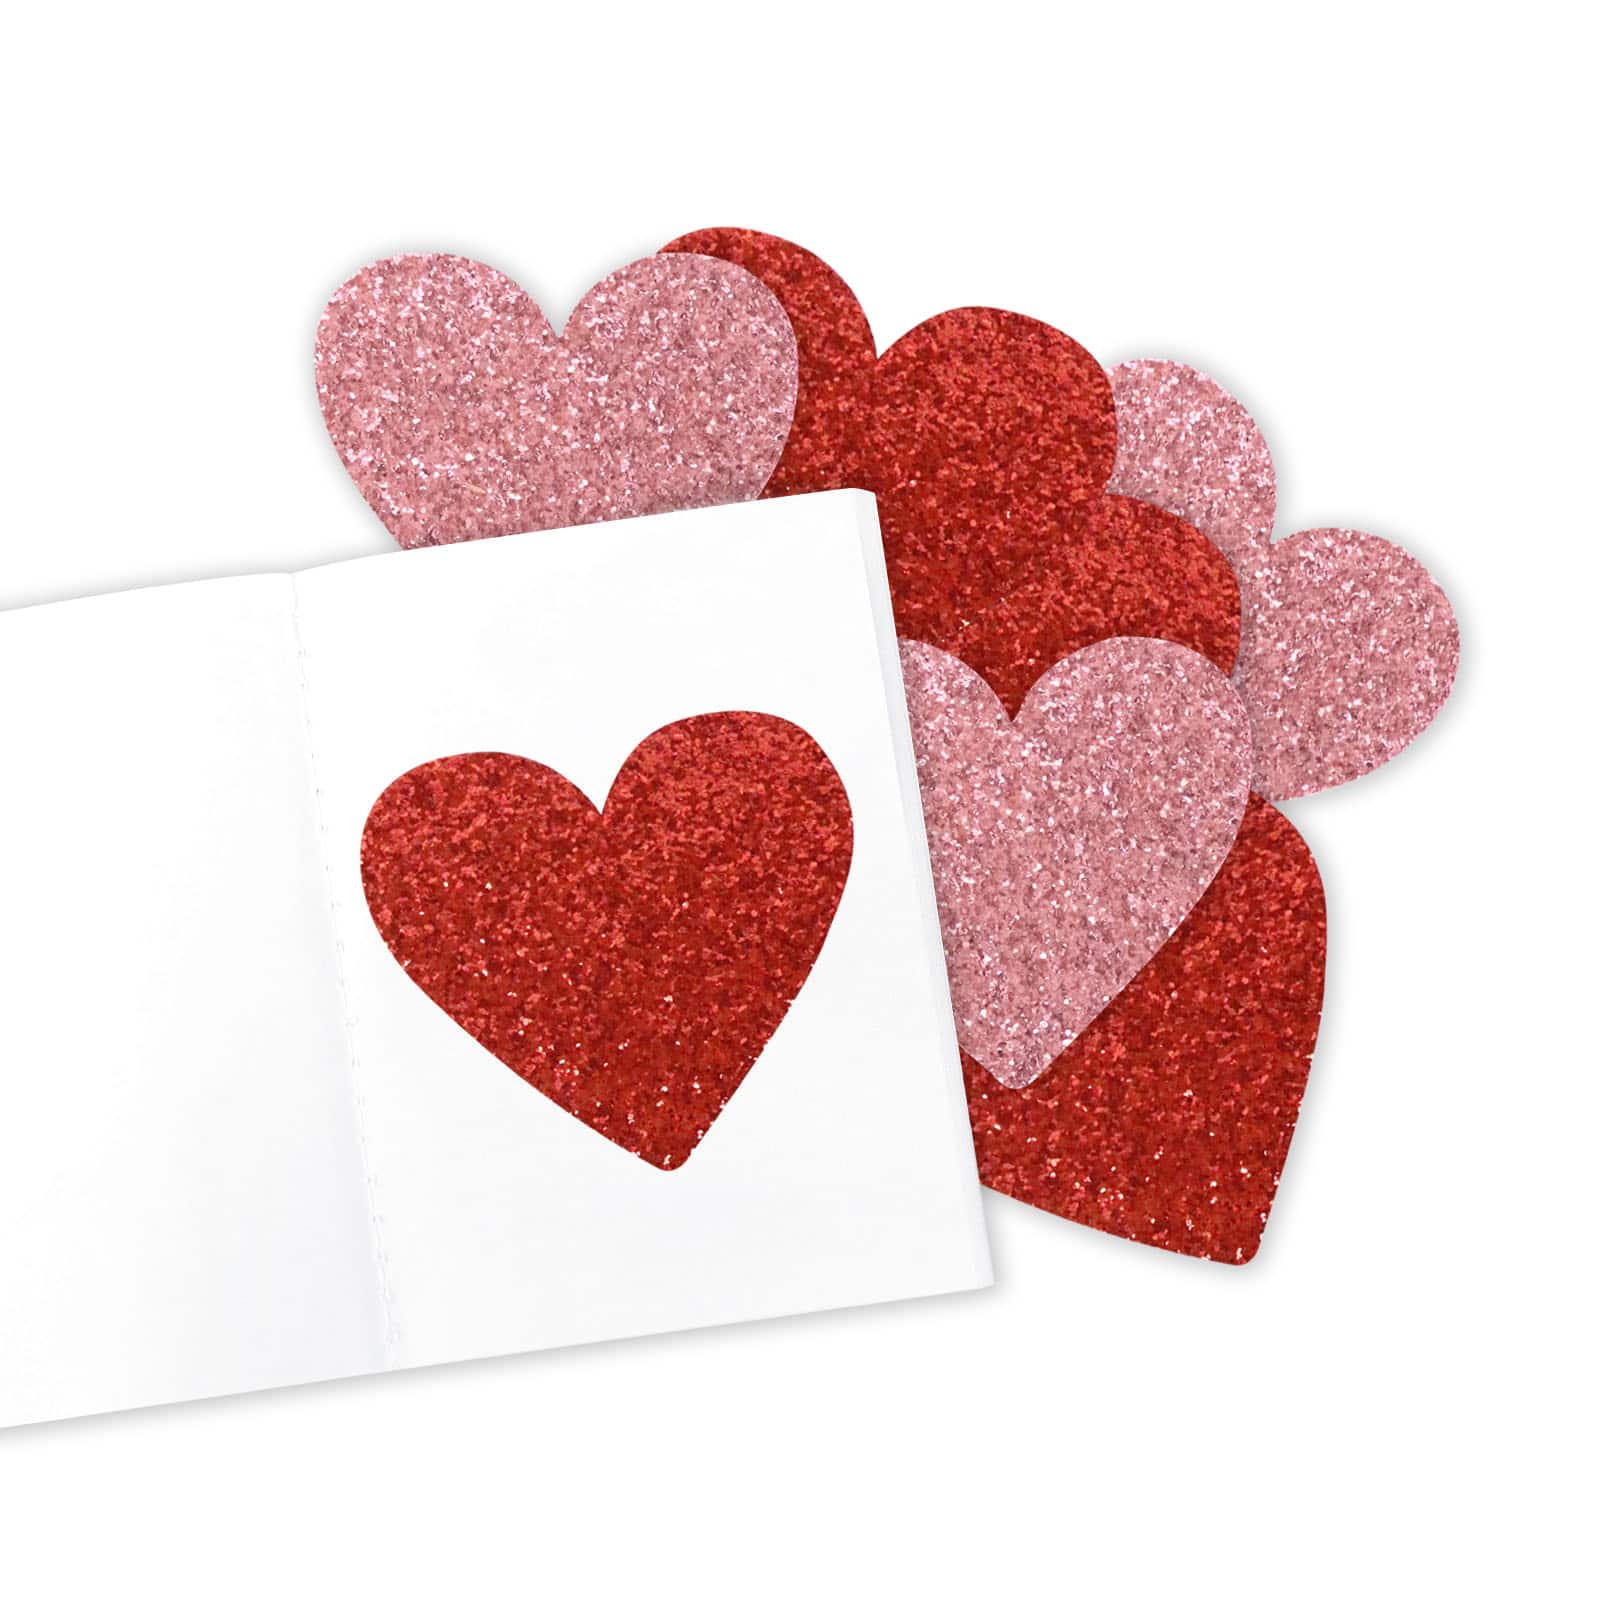 Gold Puffy Heart Stickers by Recollections™, Michaels